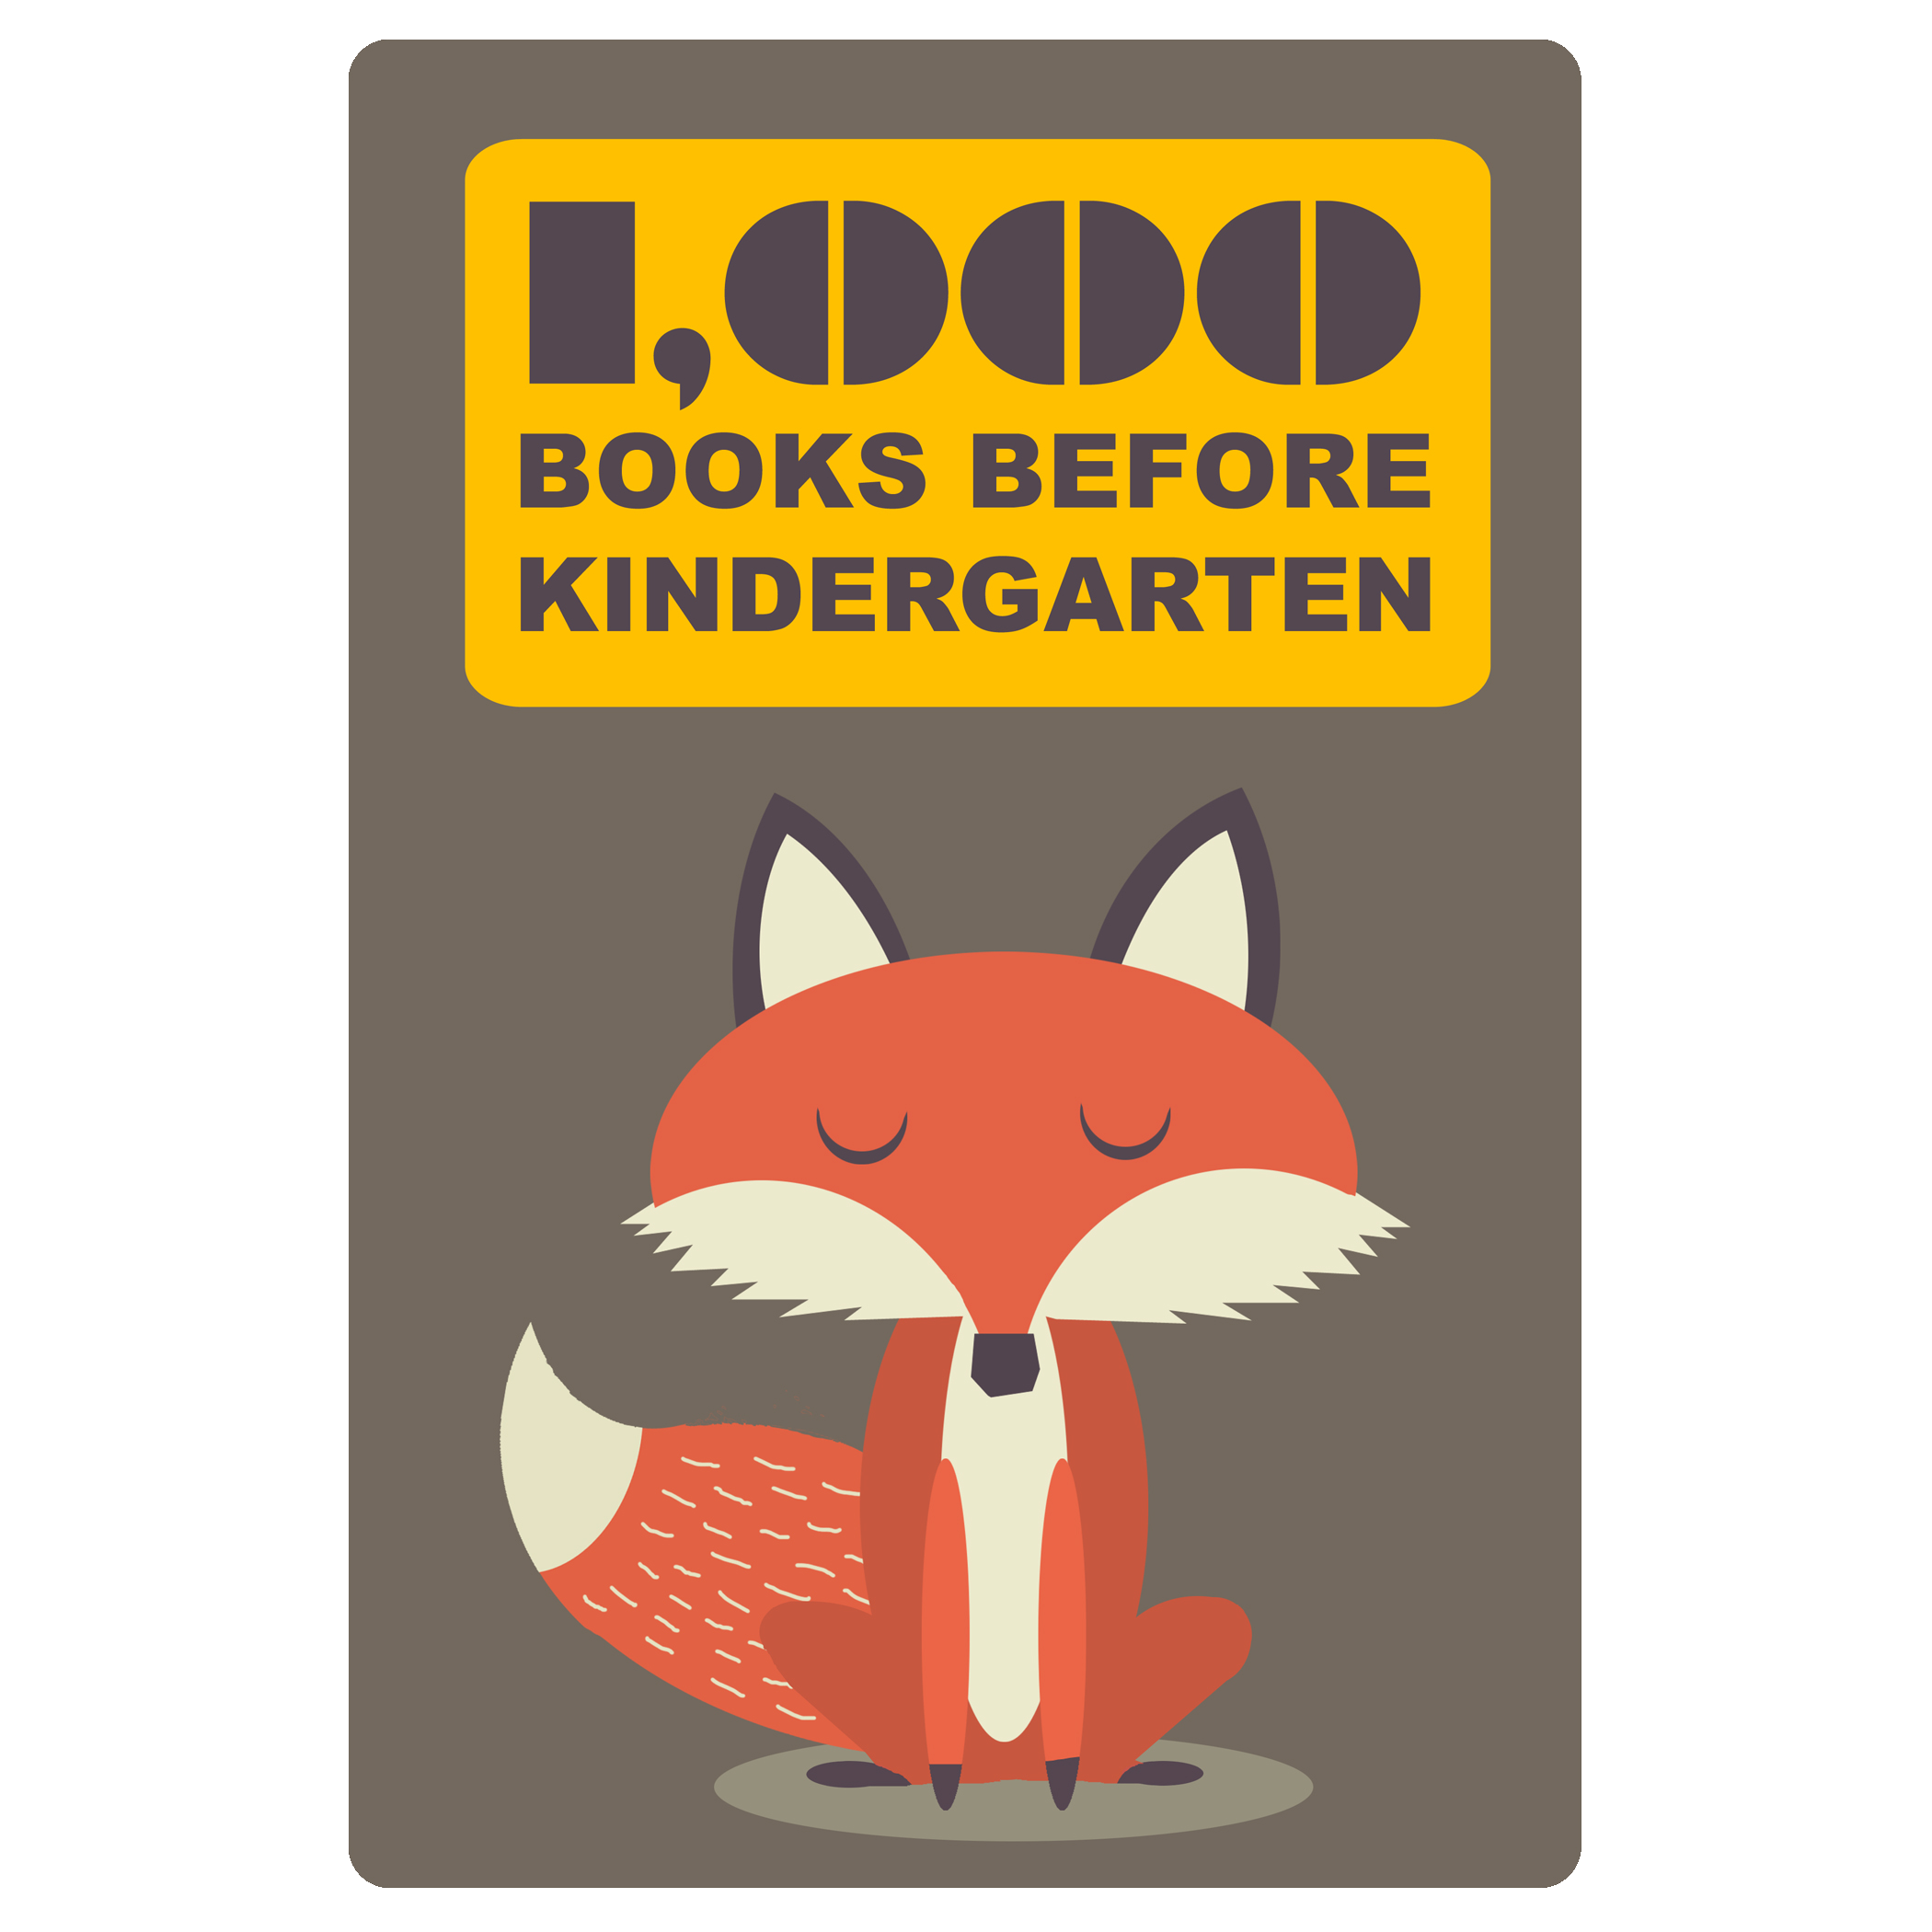 A book with a red fox on its cover